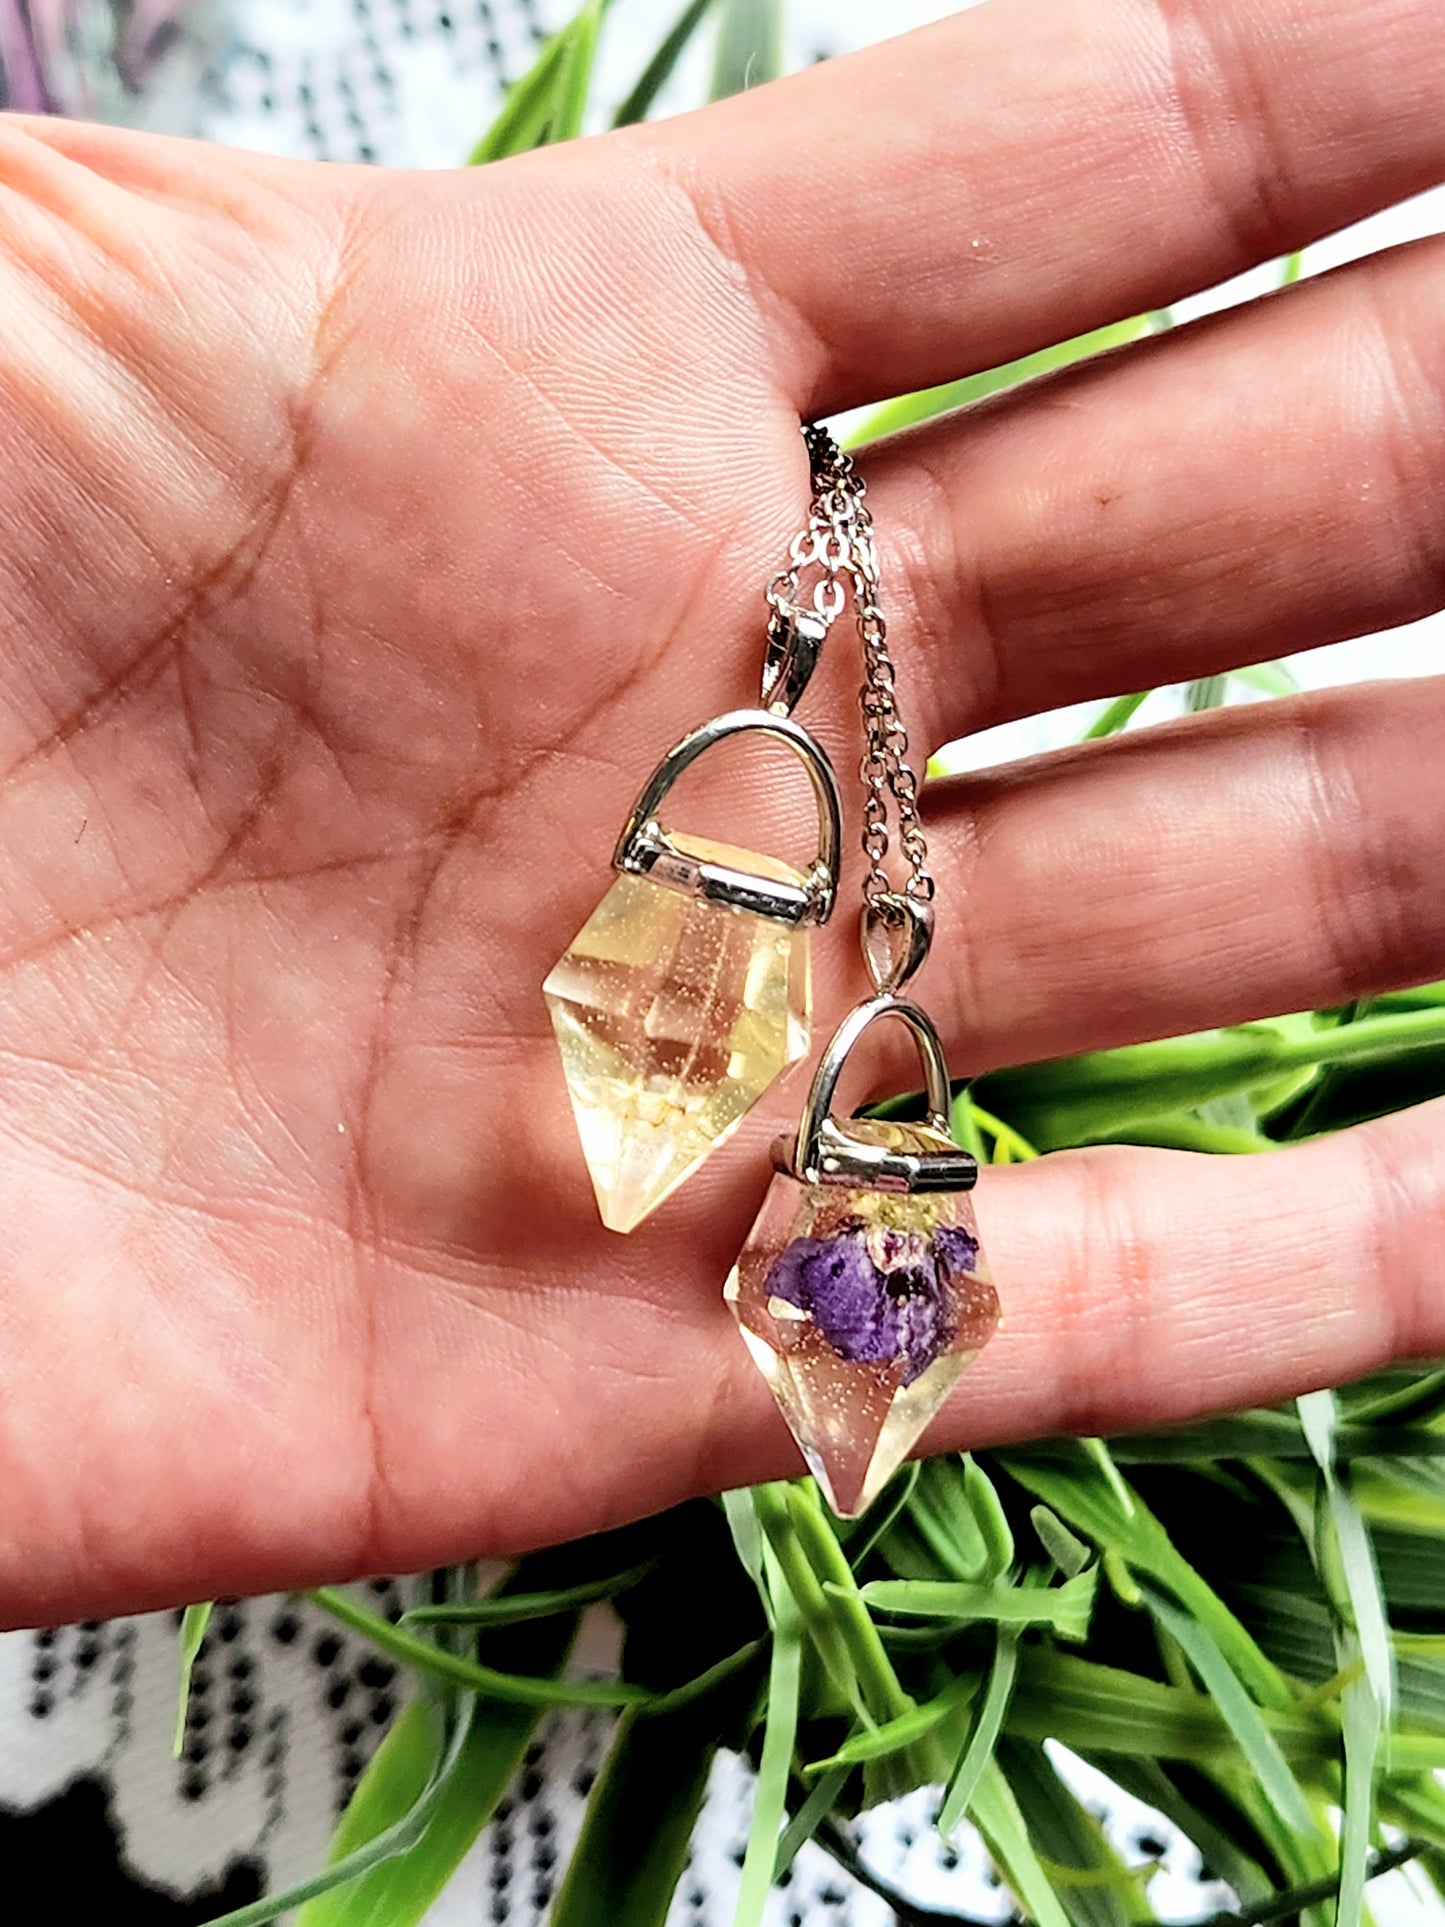 Crystal gem pendants with real flowers